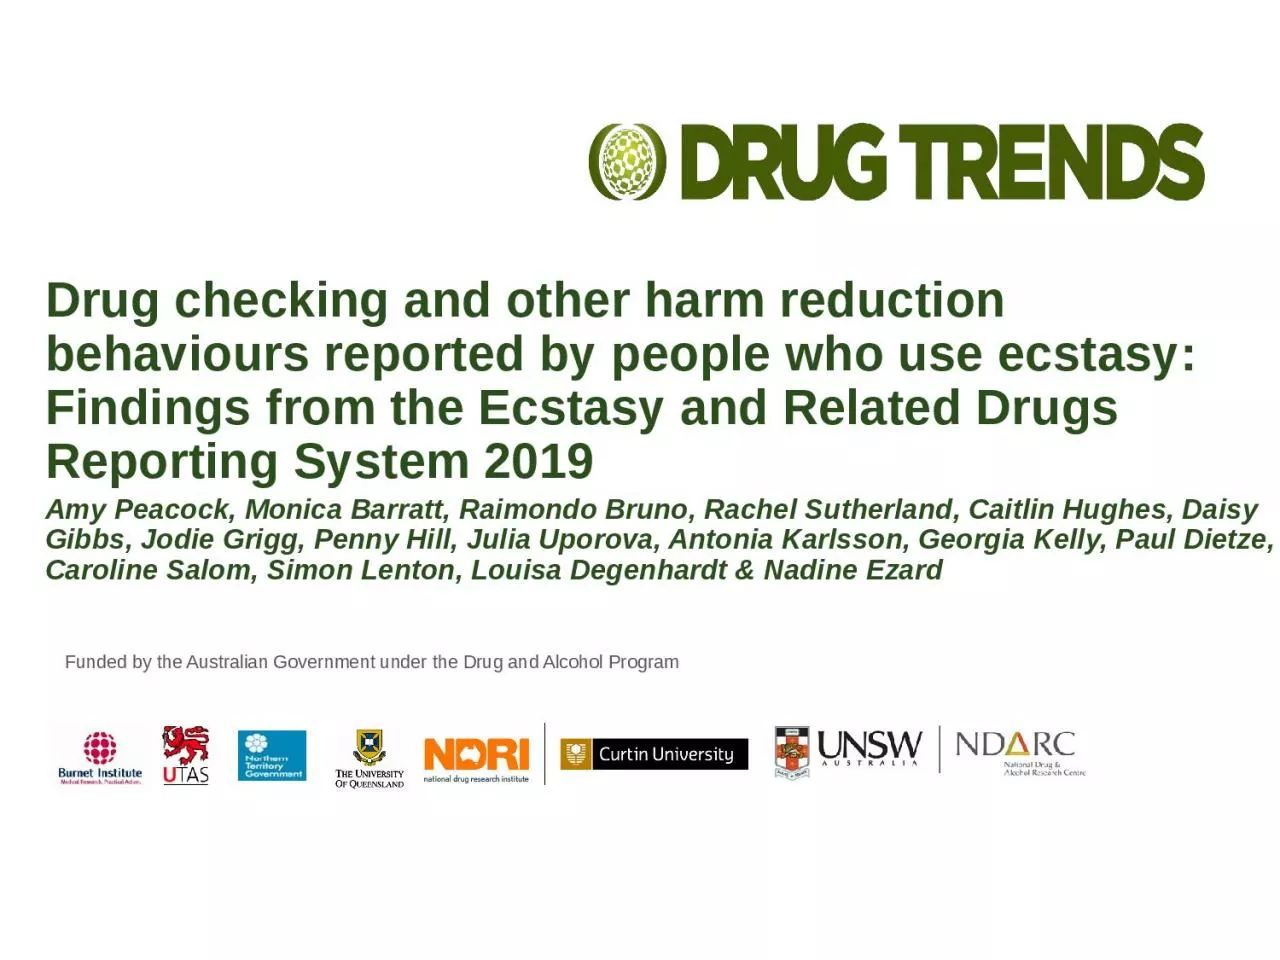 Drug checking and other harm reduction behaviours reported by people who use ecstasy: